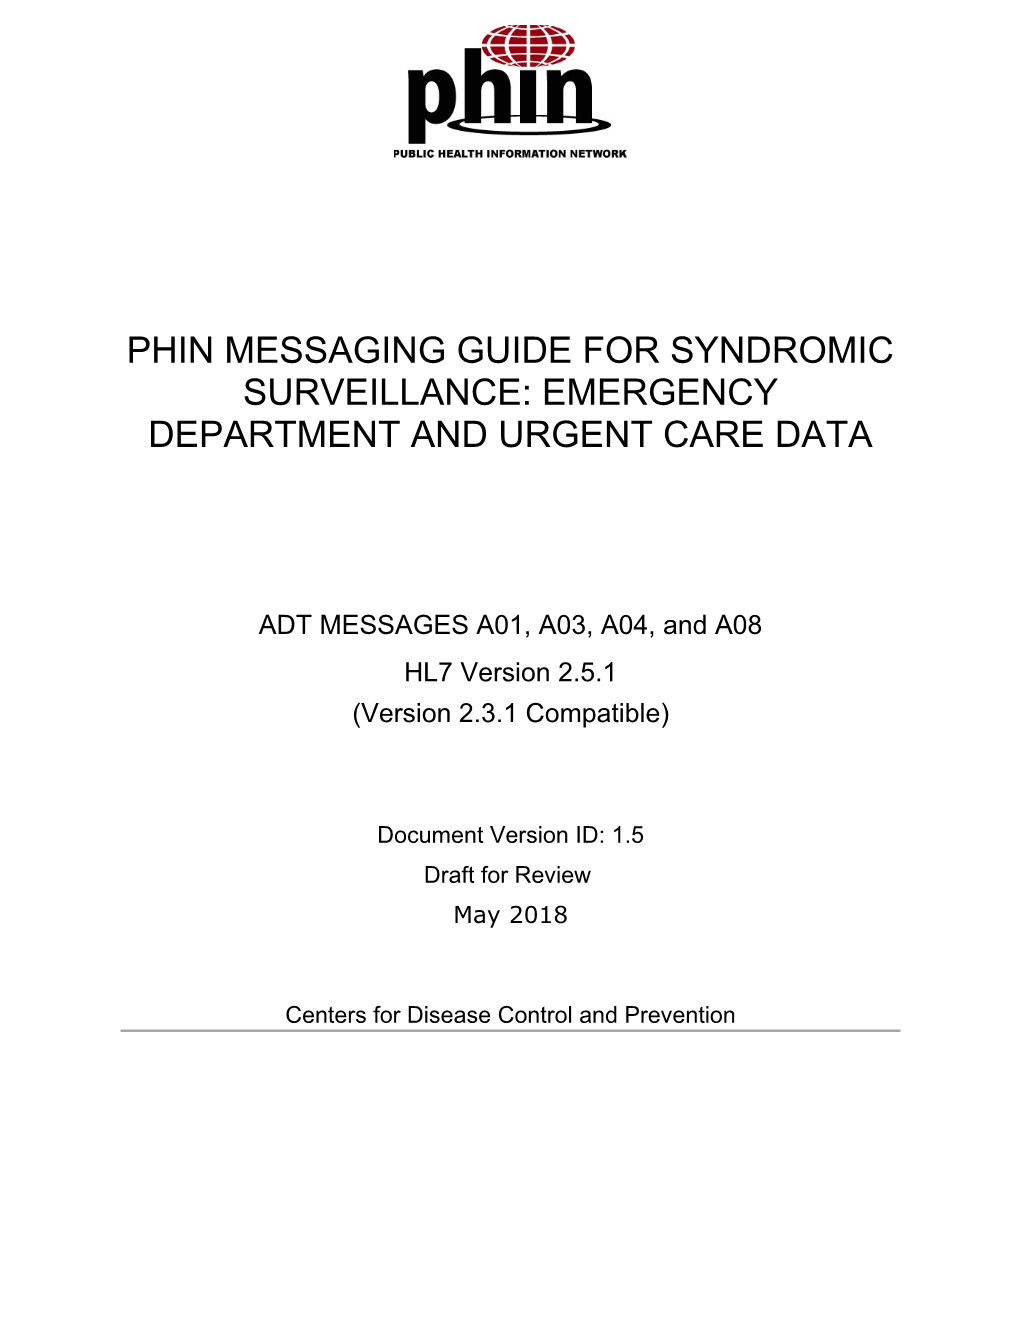 PHIN Messaging Guide for Syndromic Surveillance